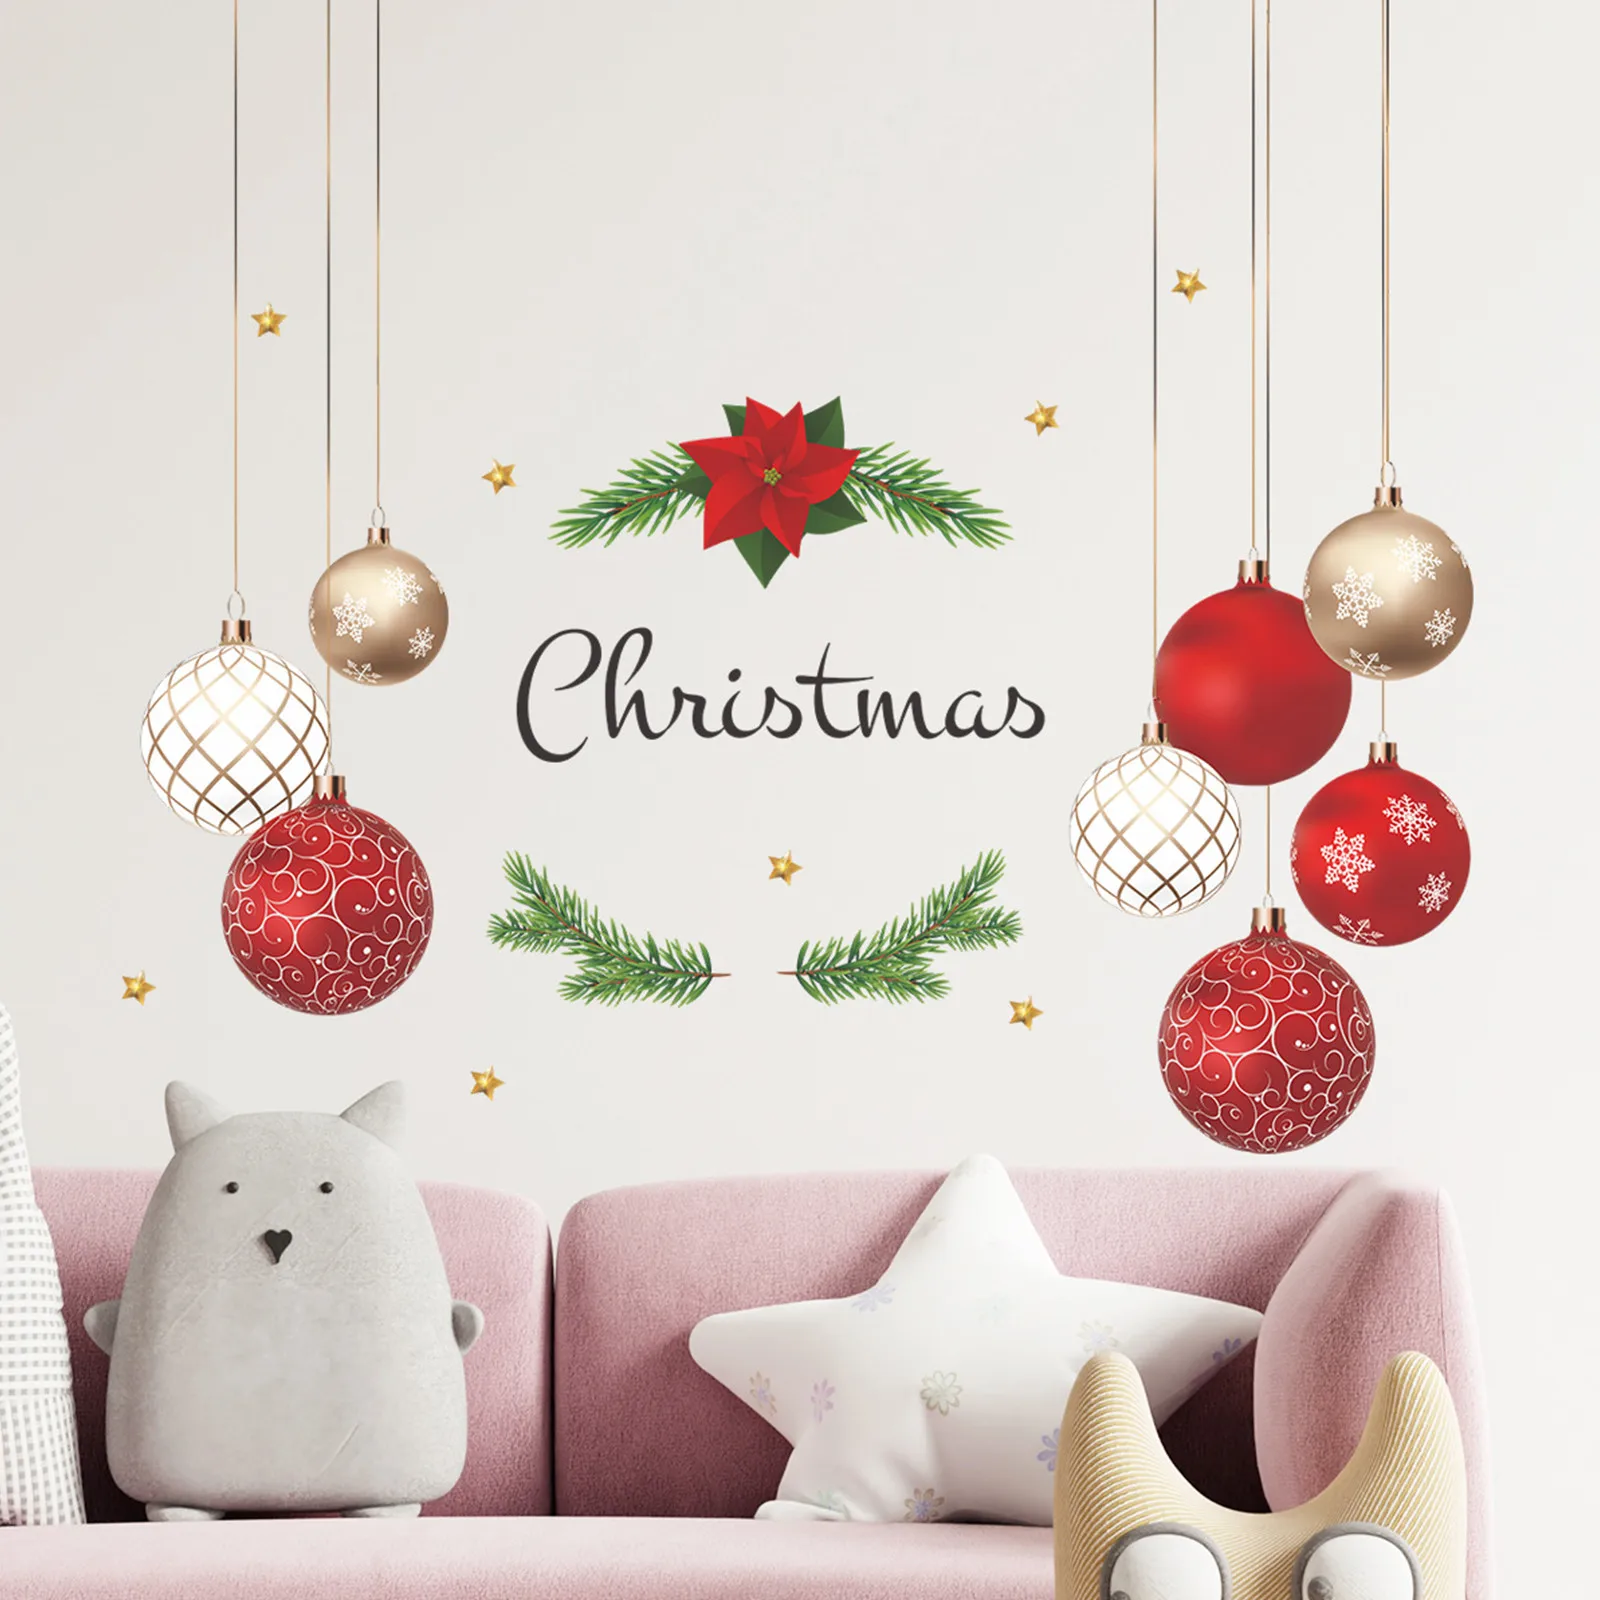 Merry Christmas 2018 Wall Hangings Sticker Ornaments Party supplier Dec for Home 